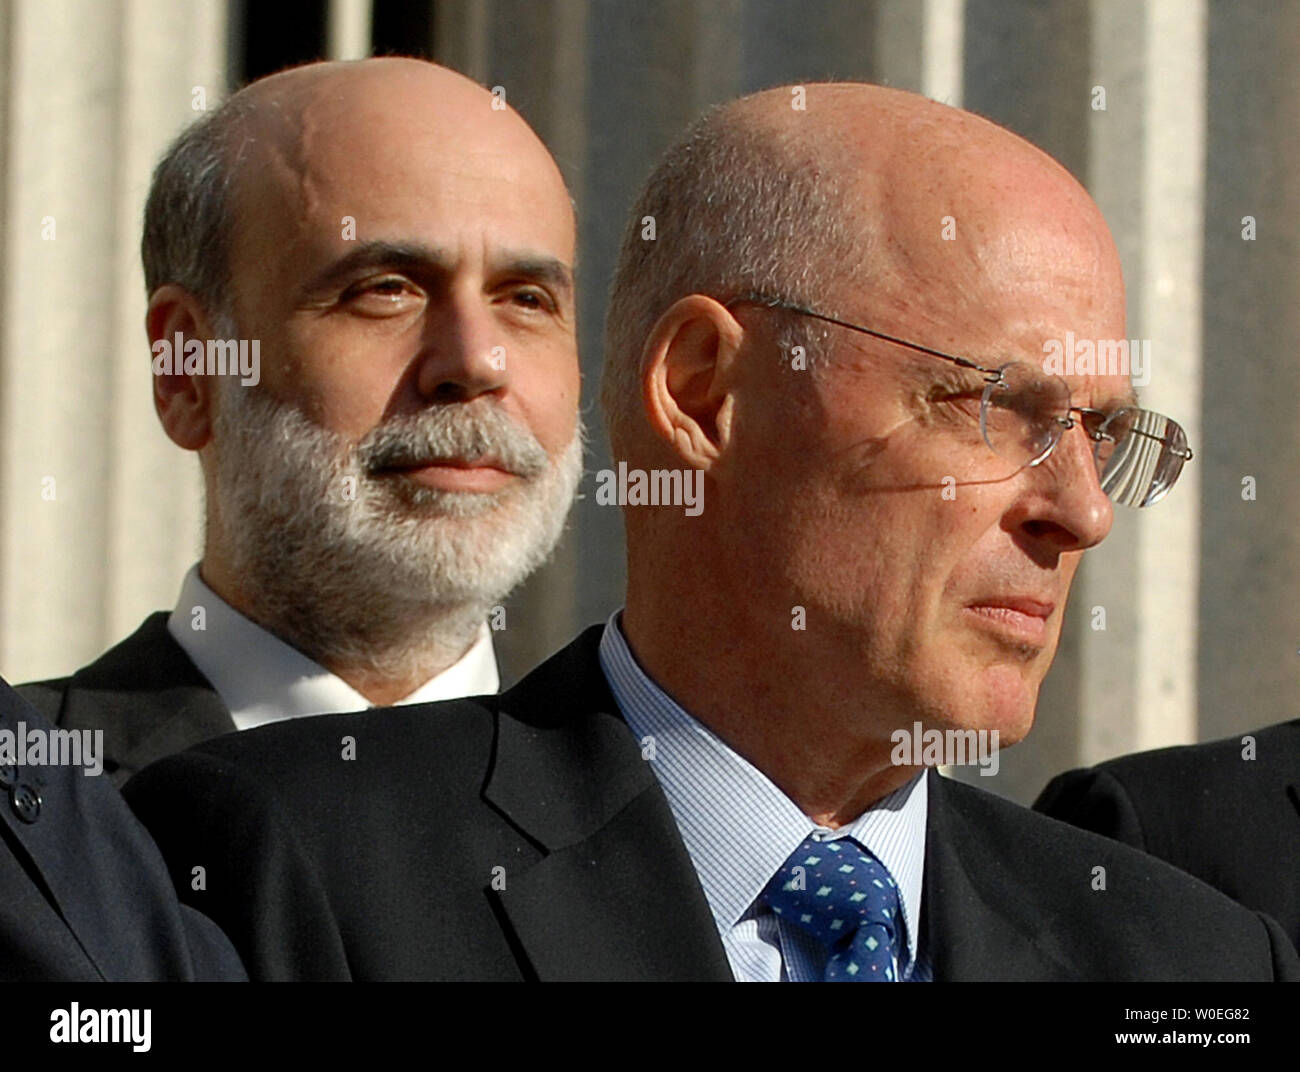 U.S.Treasury Secretary Henry Paulson (R) walks in front of U.S. Federal Reserve Board Chairman Ben Bernanke during a photo session with the Group of Seven finance ministers and central bank governors on the steps of the Treasury Department in Washington on October 10, 2008. The world ministers pledged decisive action to deal with the worst the global financial crisis since the Great Depression.   (UPI Photo/Roger L. Wollenberg) Stock Photo